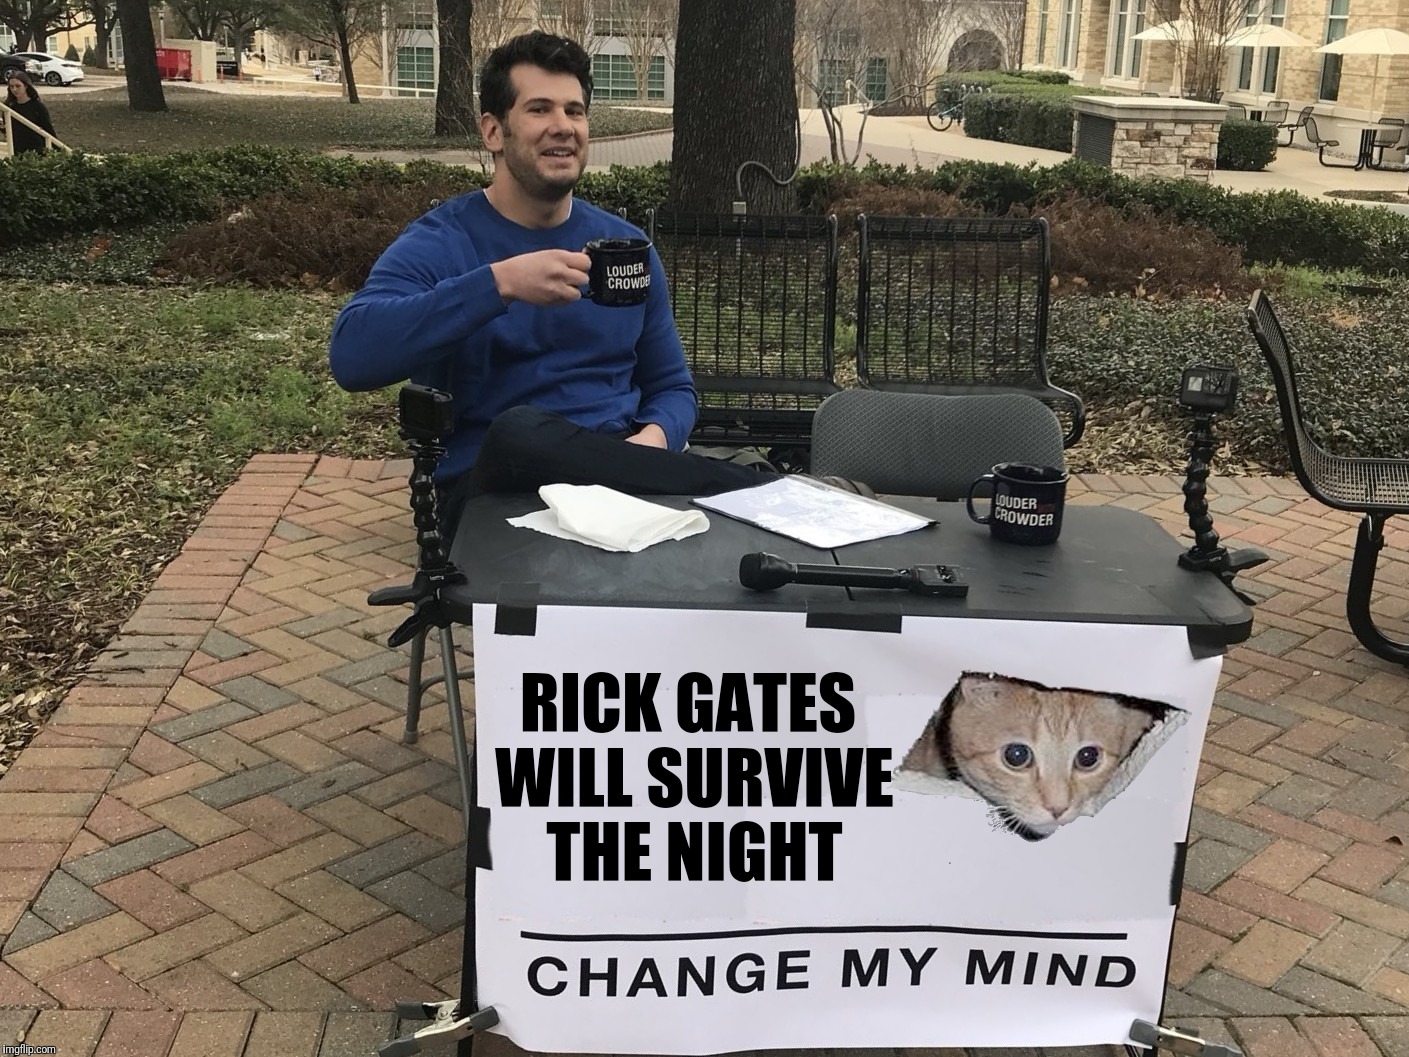 RICK GATES WILL SURVIVE THE NIGHT | made w/ Imgflip meme maker